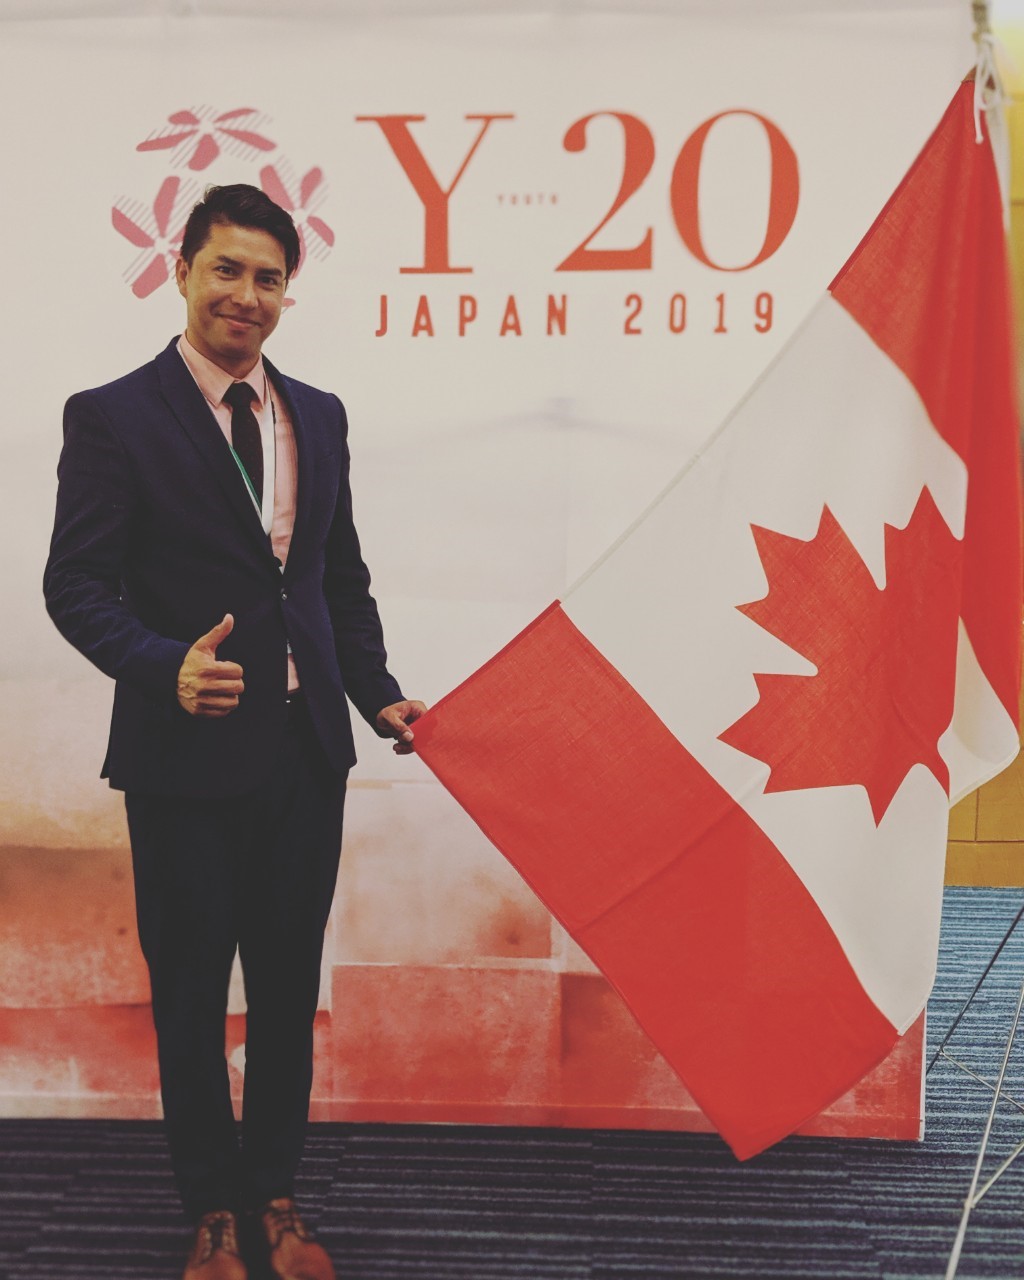 Ali Bahman stands next to a Canadian flag and in front of a sign for the G20 summit in Japan.